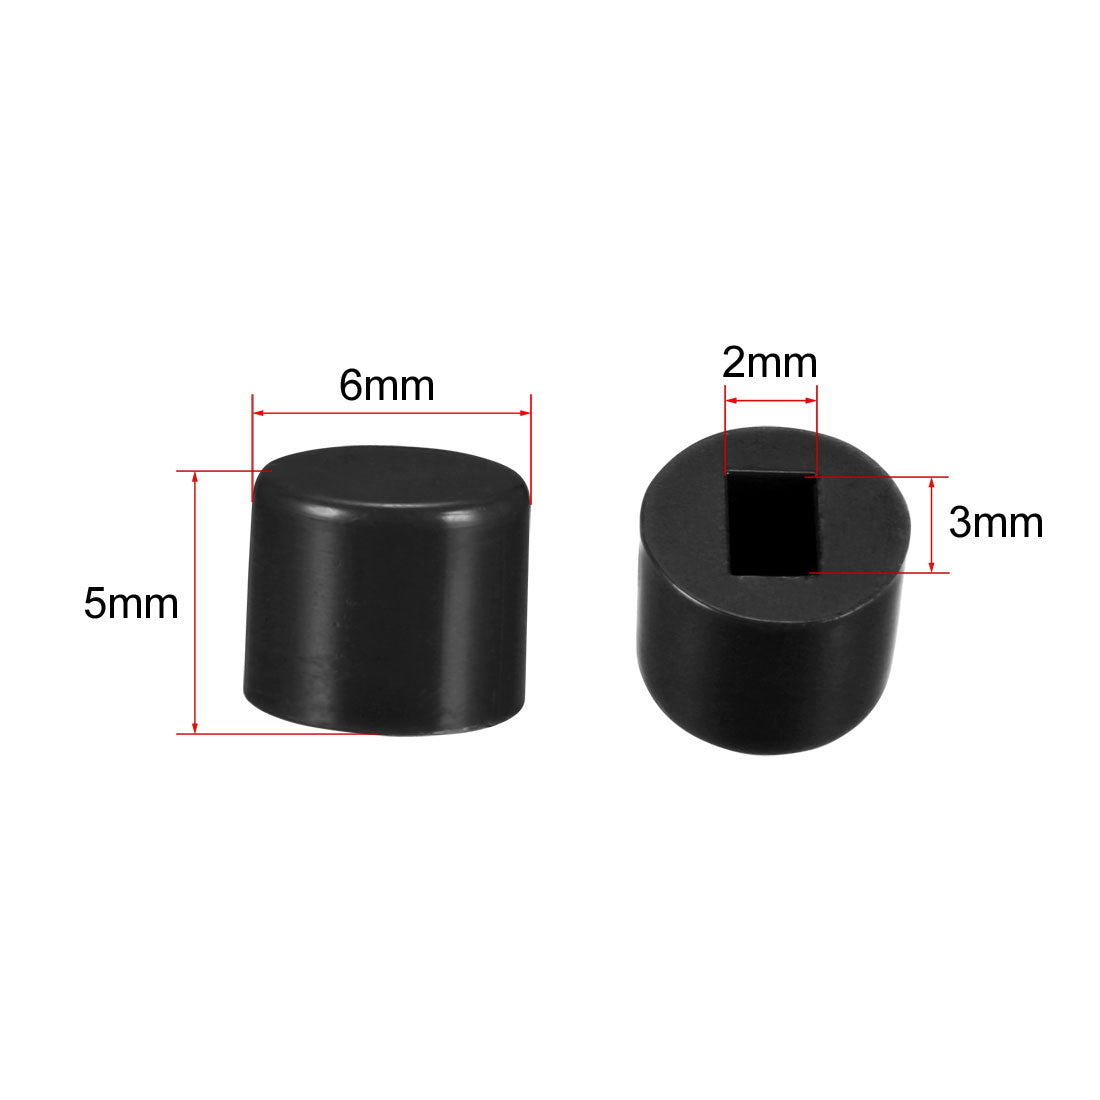 uxcell Uxcell 40Pcs Plastic 6x5mm Latching Pushbutton Tactile Switch Caps Cover Keycaps Protector Black